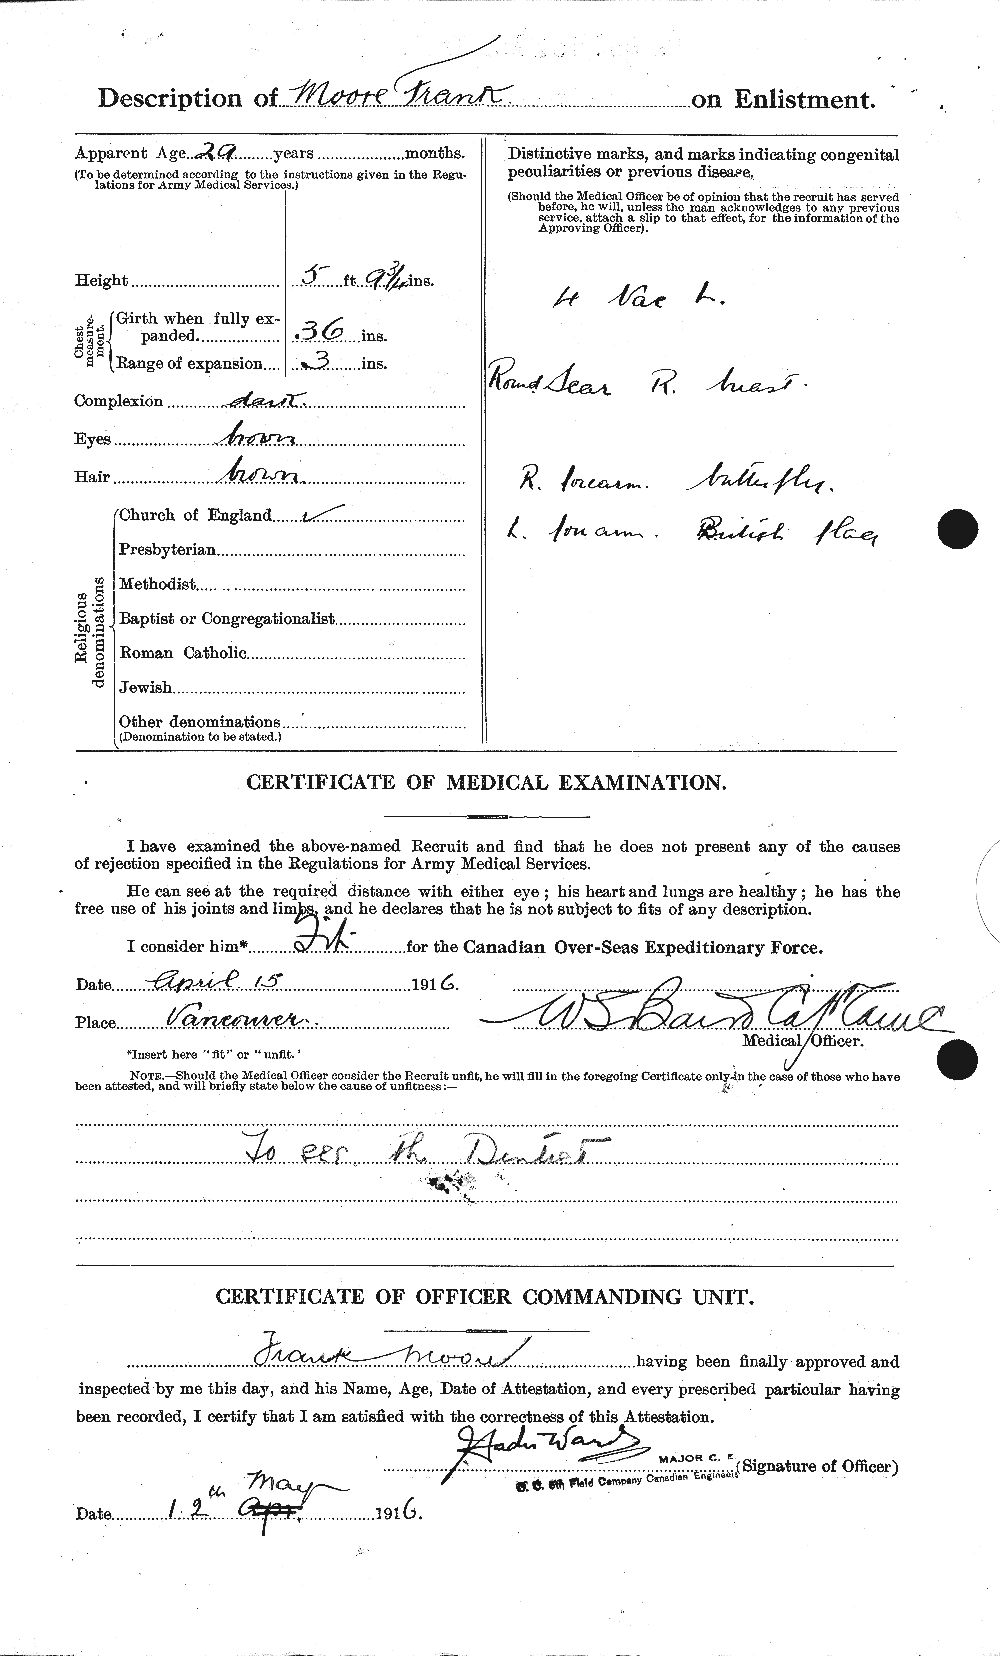 Personnel Records of the First World War - CEF 506694b